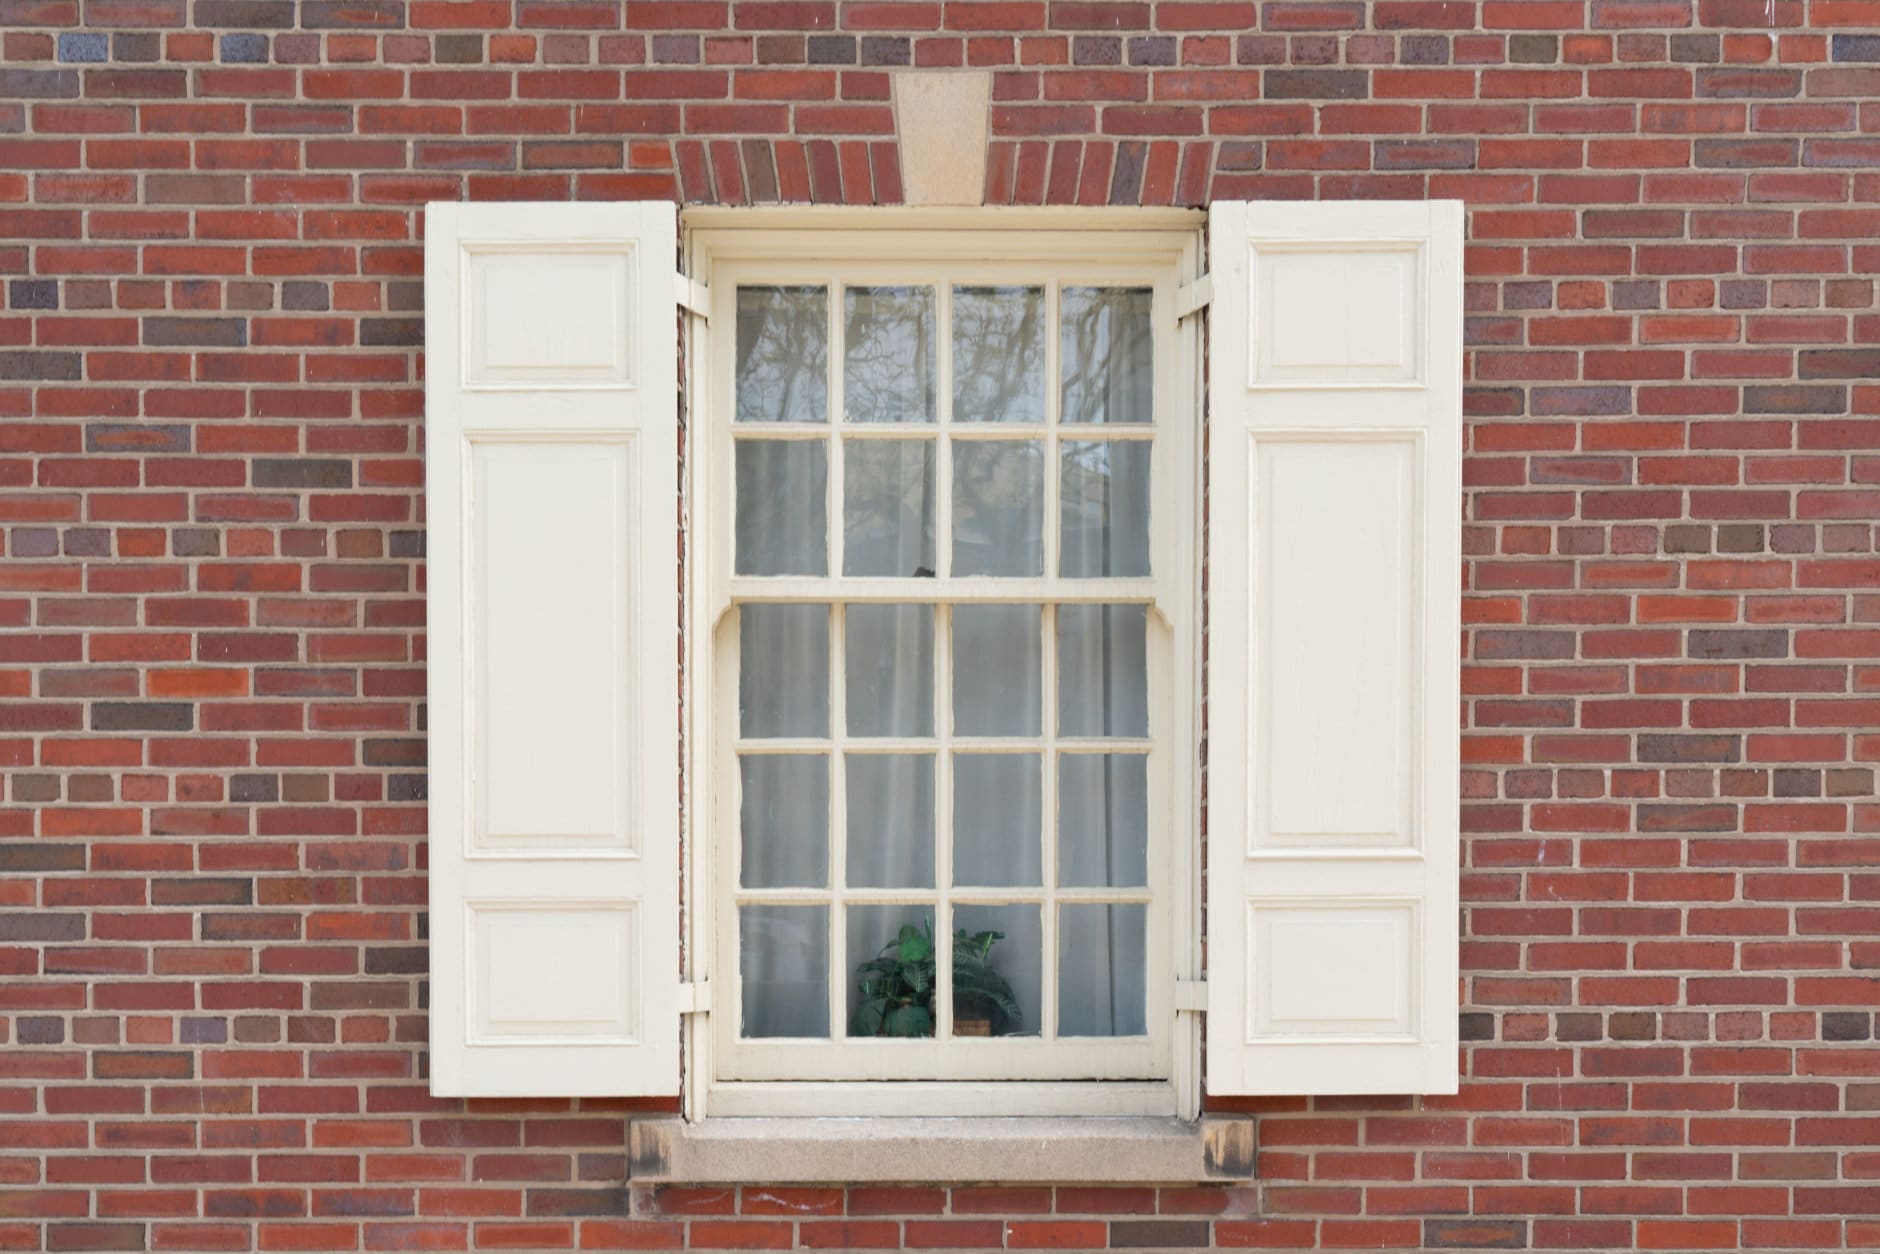 Old colonial window with shutters on historic brick building